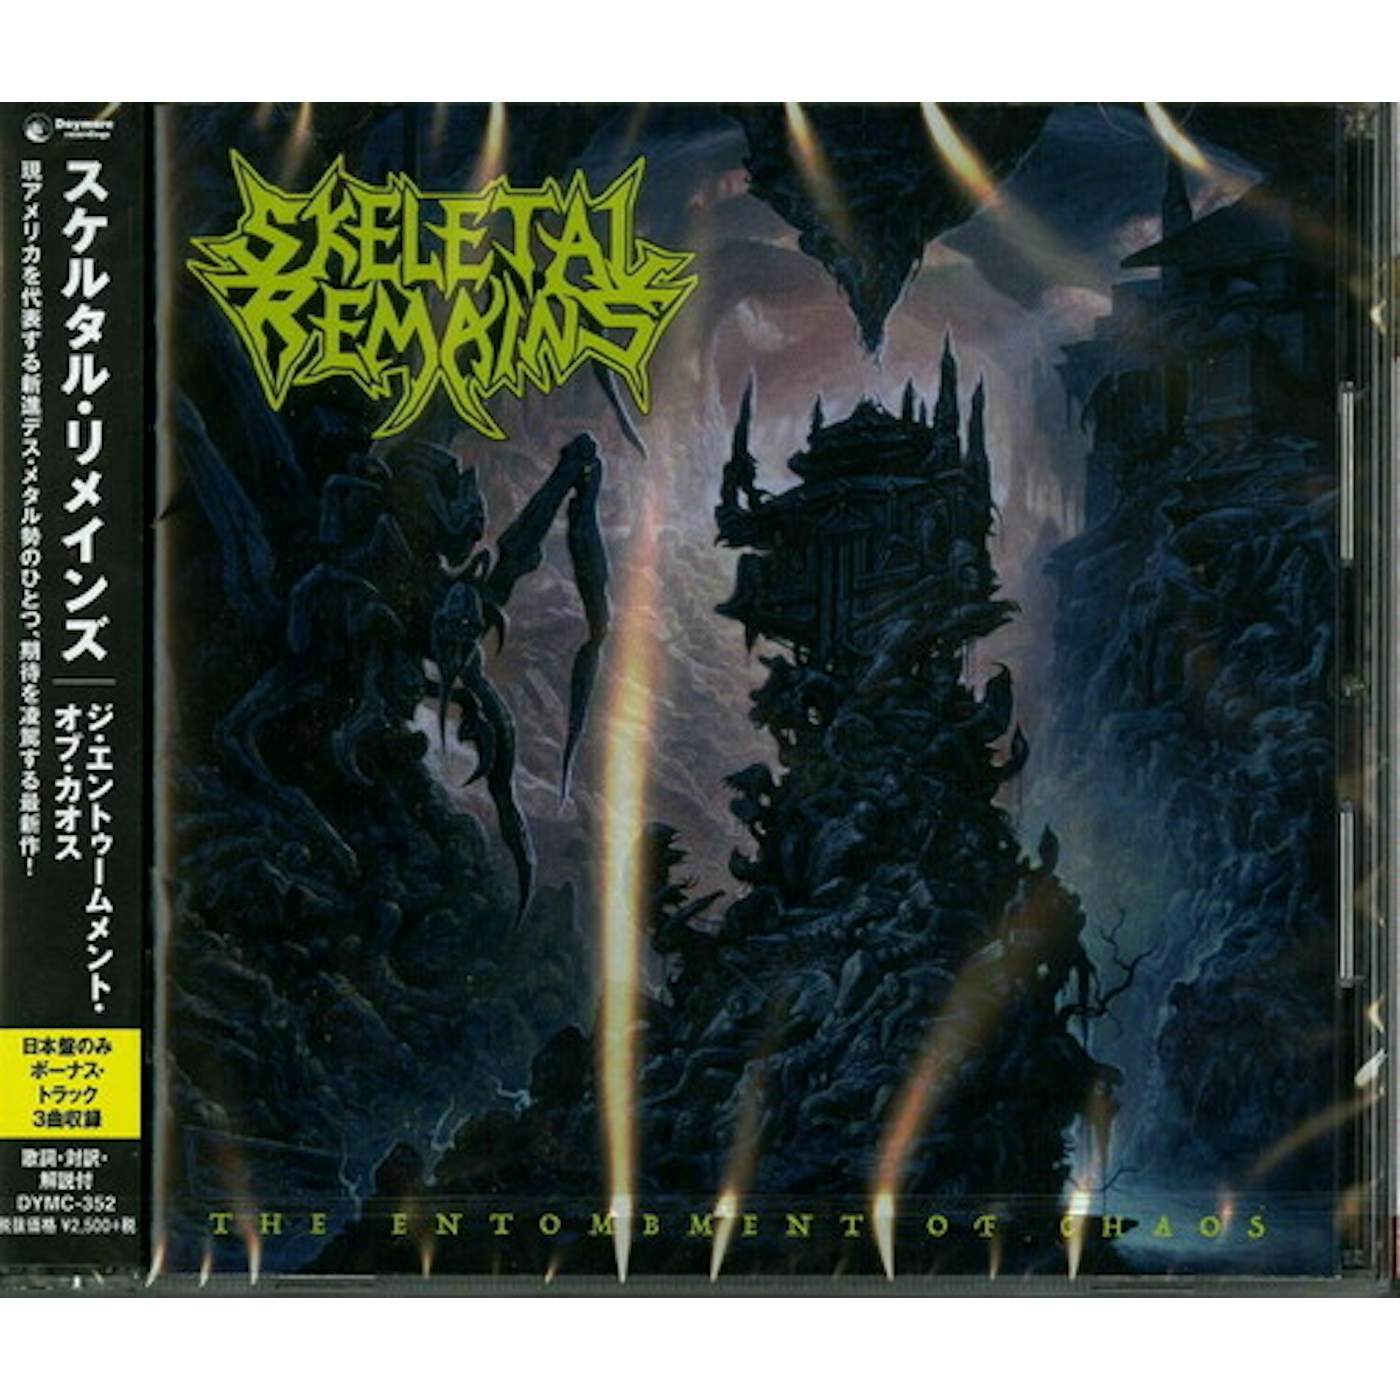 Skeletal Remains ENTOMBMENT OF CHAOS CD